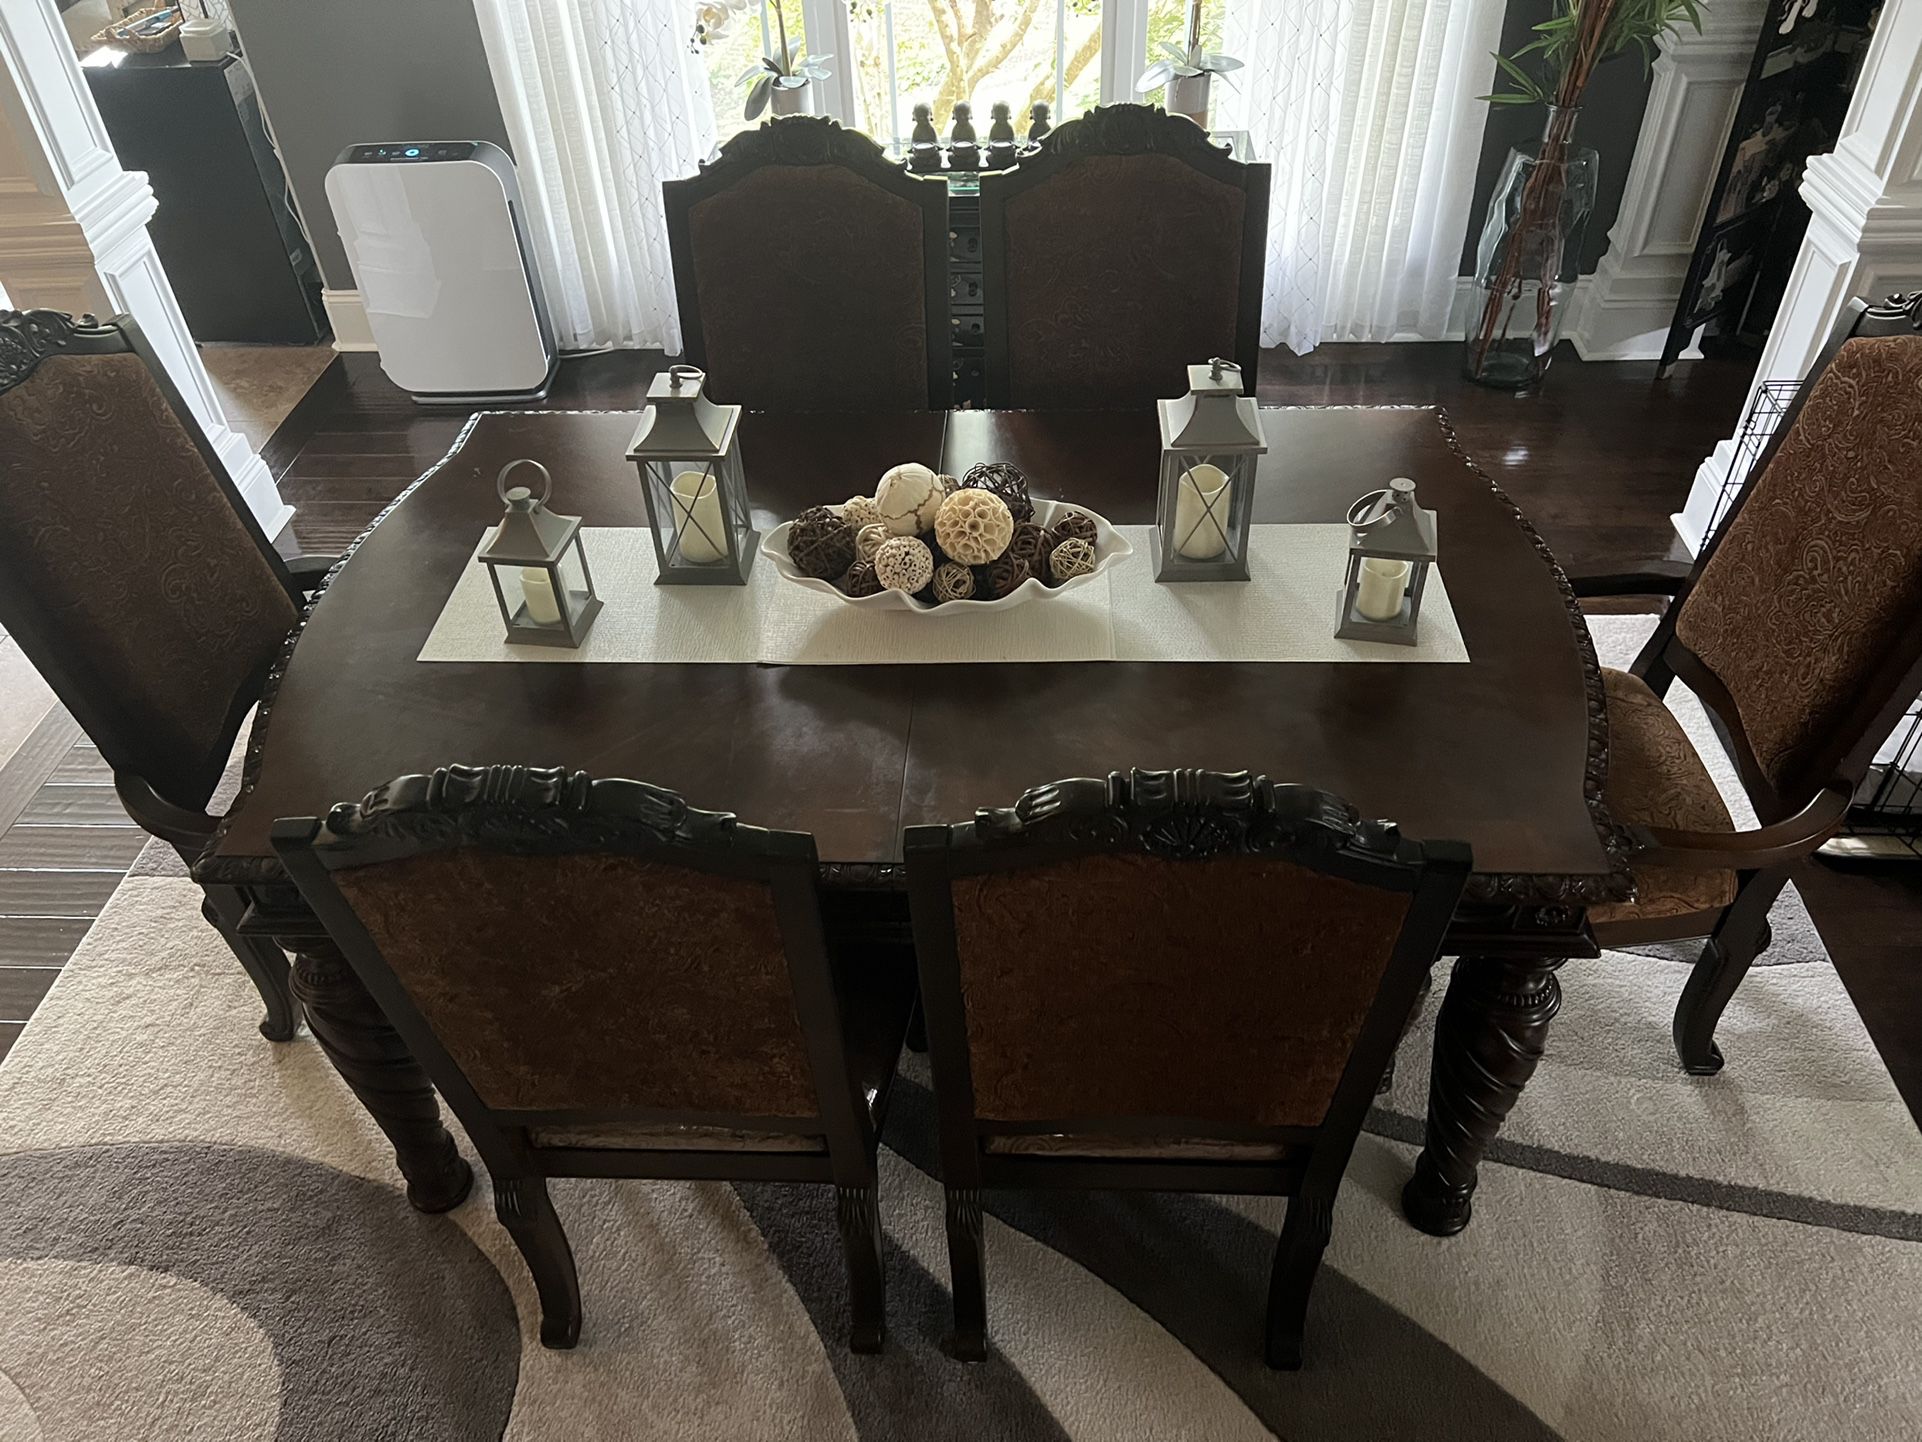 Formal Dinning Room Table seating for 8